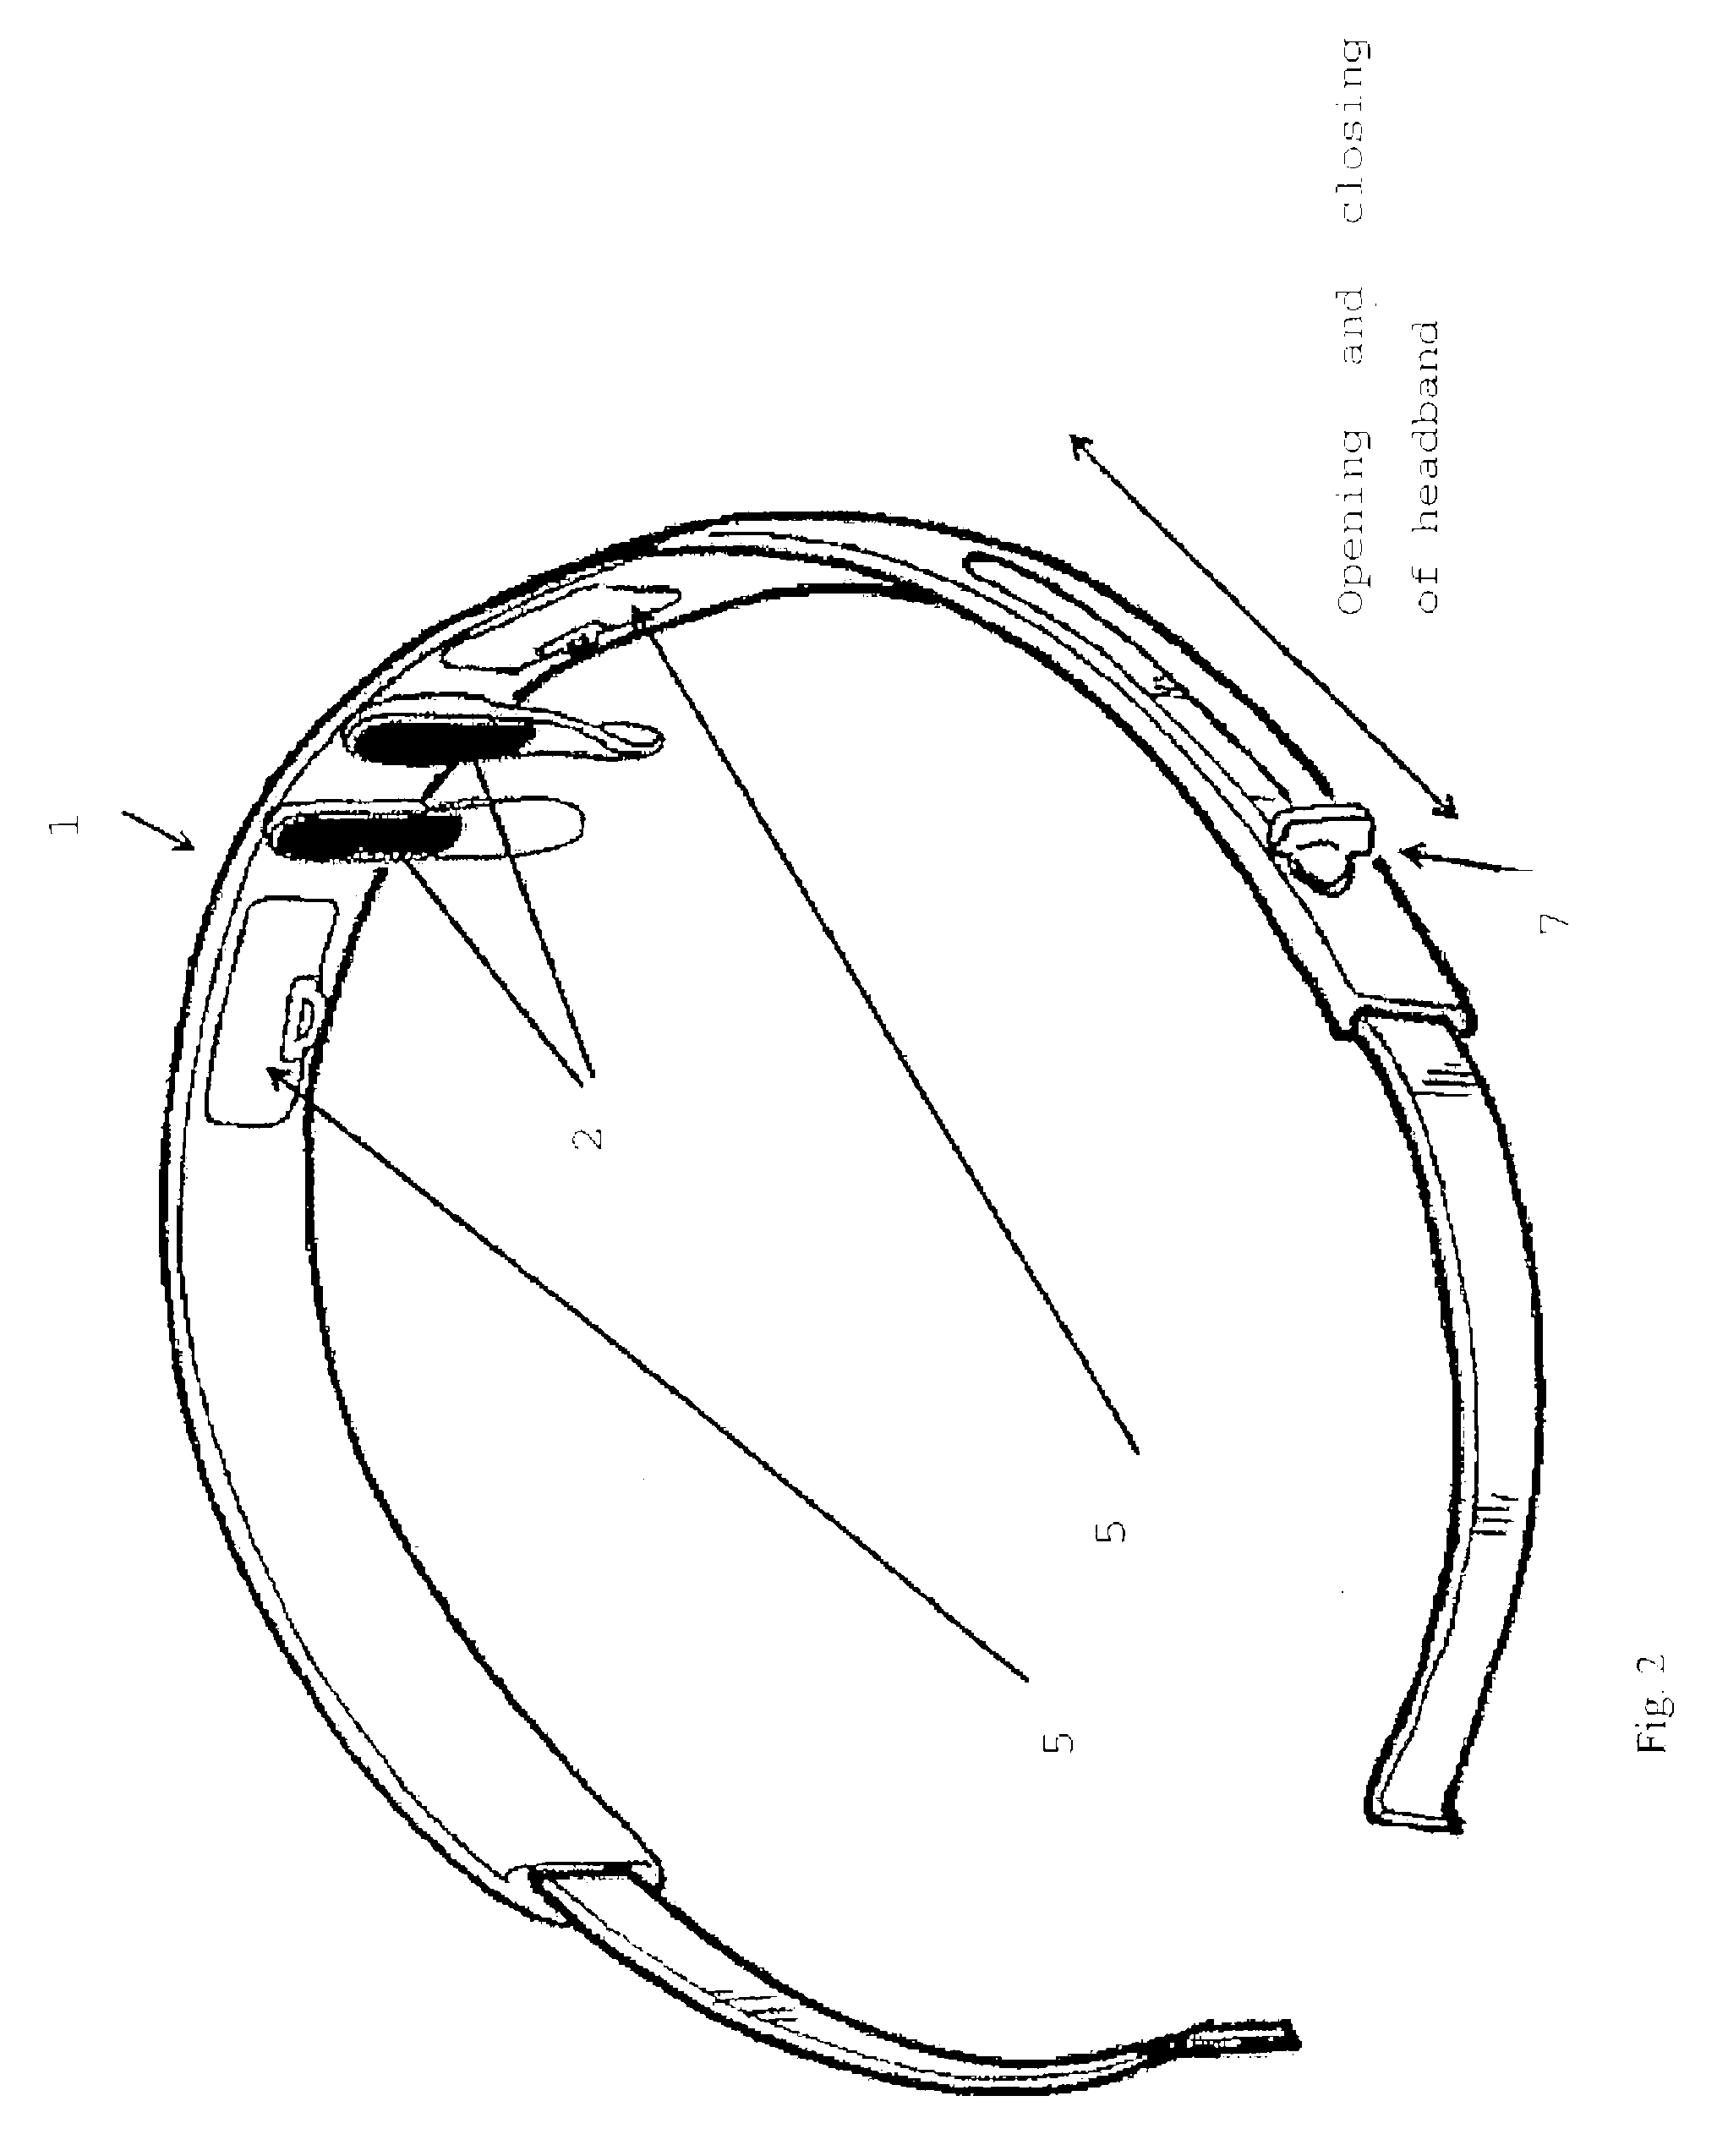 Apparatus for electro-inhibition of facial muscles